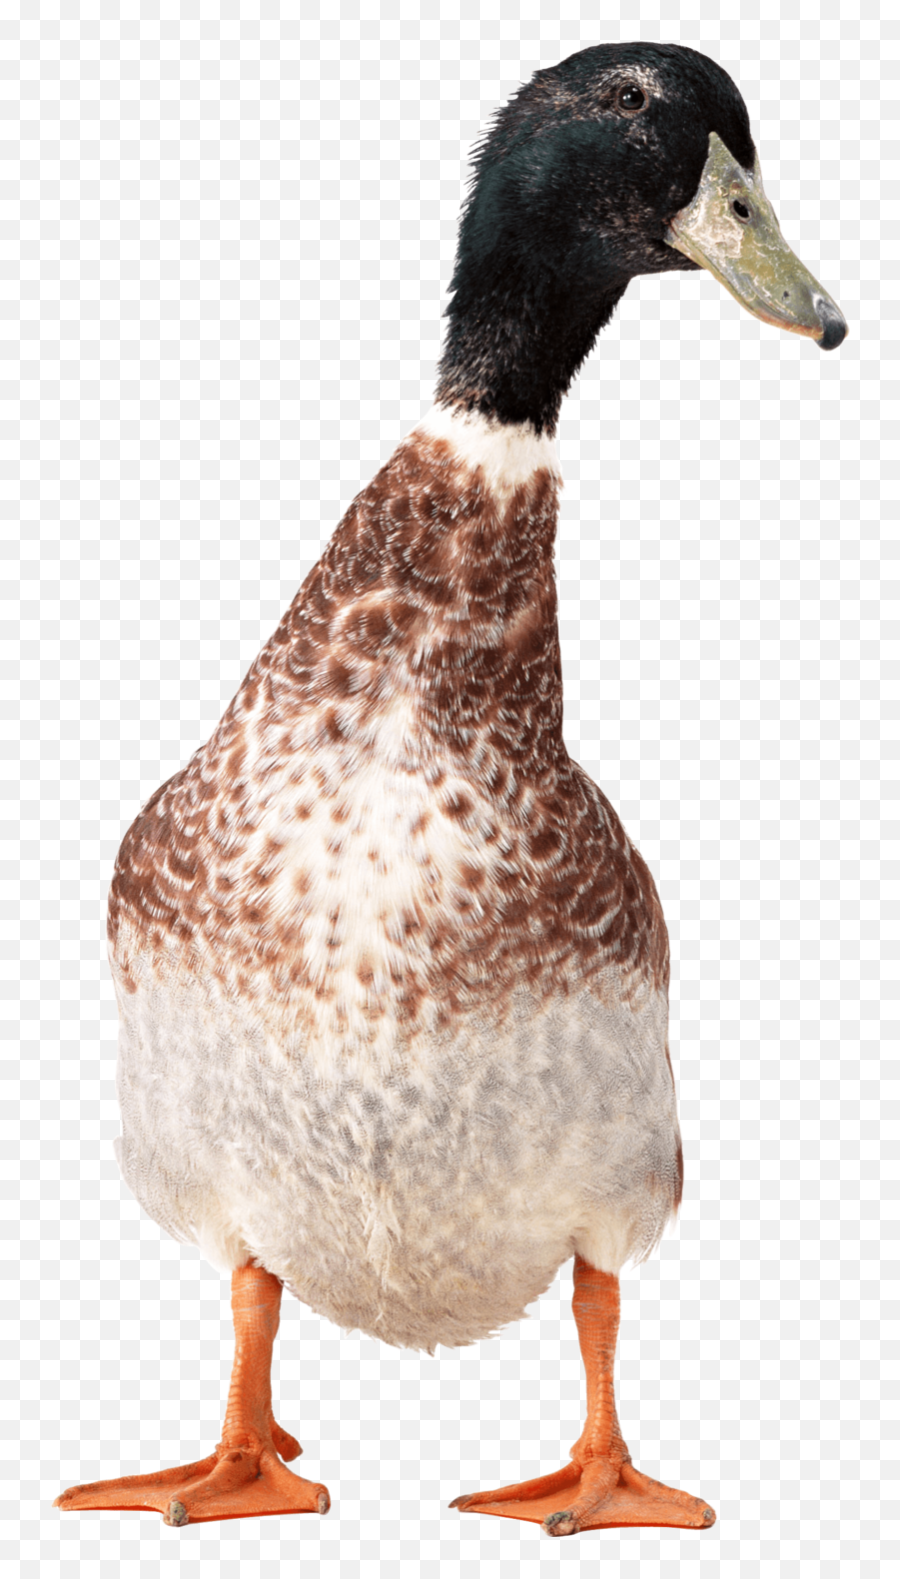 Download Free Png Duck Image - Dlpngcom Kerala Duck Png,Hedge Png